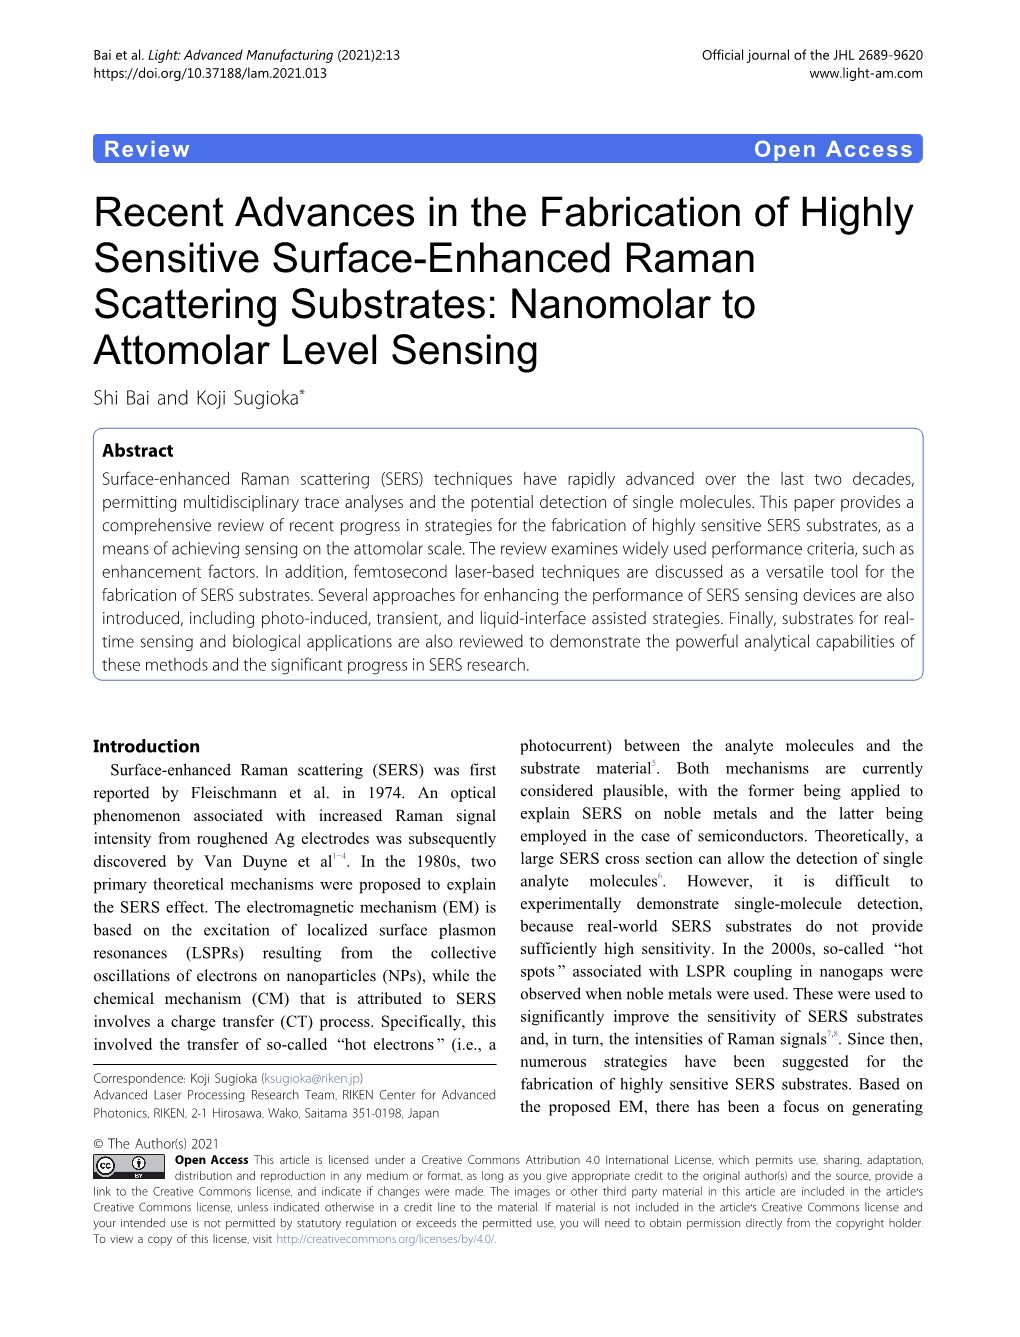 Recent Advances in the Fabrication of Highly Sensitive Surface-Enhanced Raman Scattering Substrates: Nanomolar to Attomolar Level Sensing